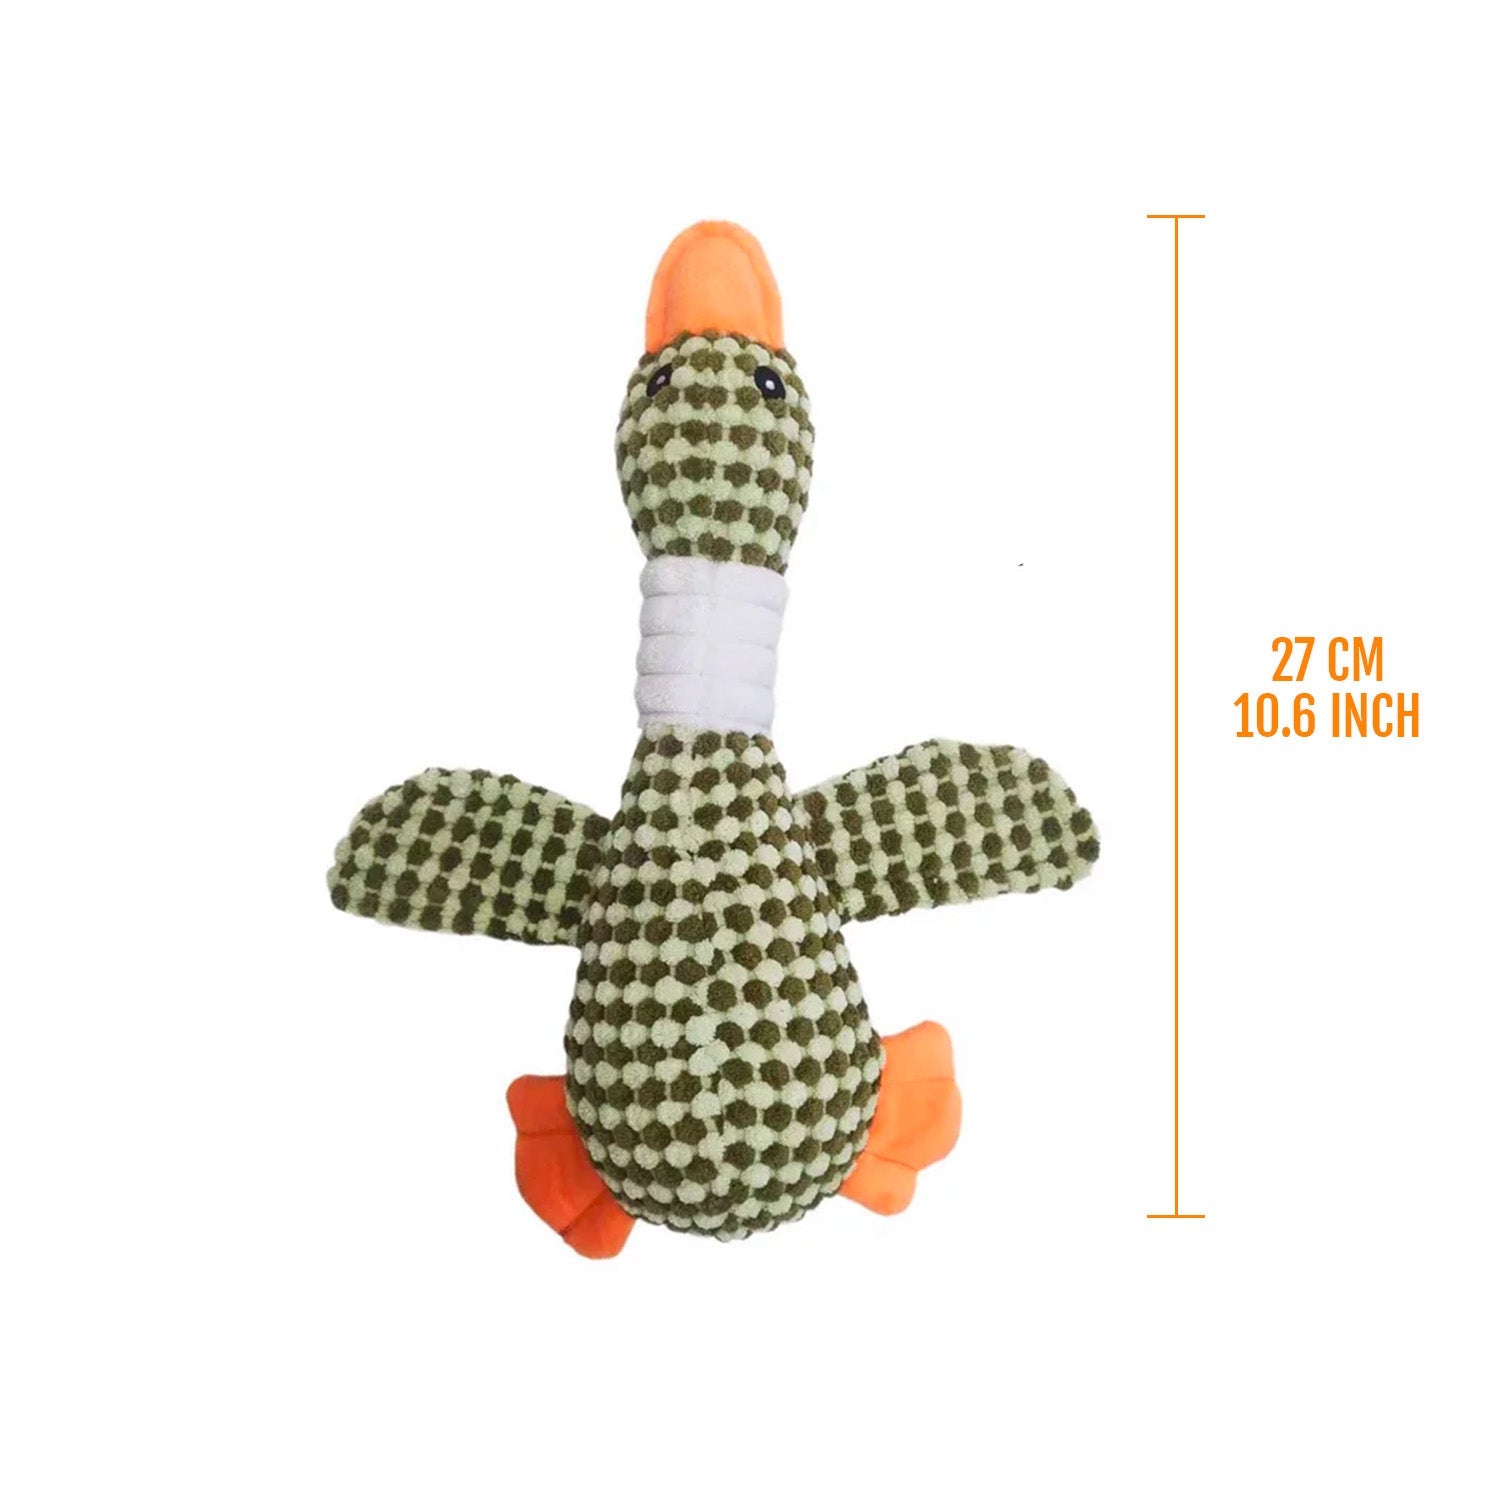 Duck Squeak Toy for Dogs - Pets Paradise